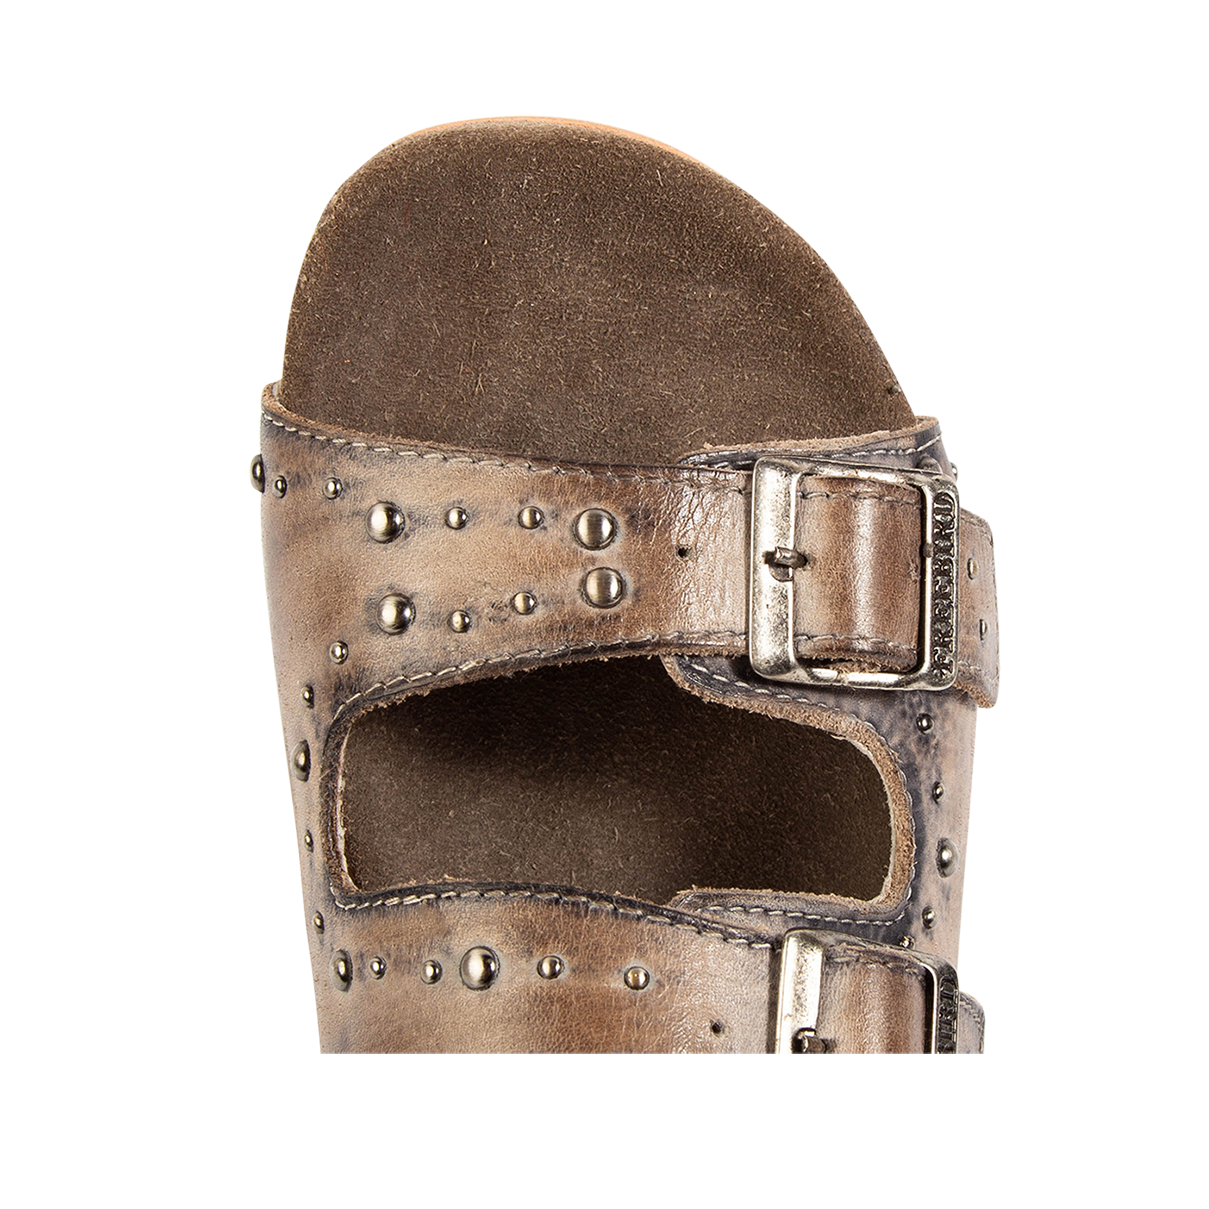 Top view showing a rounded exposed toe bed on FREEBIRD women's Asher stone sandal